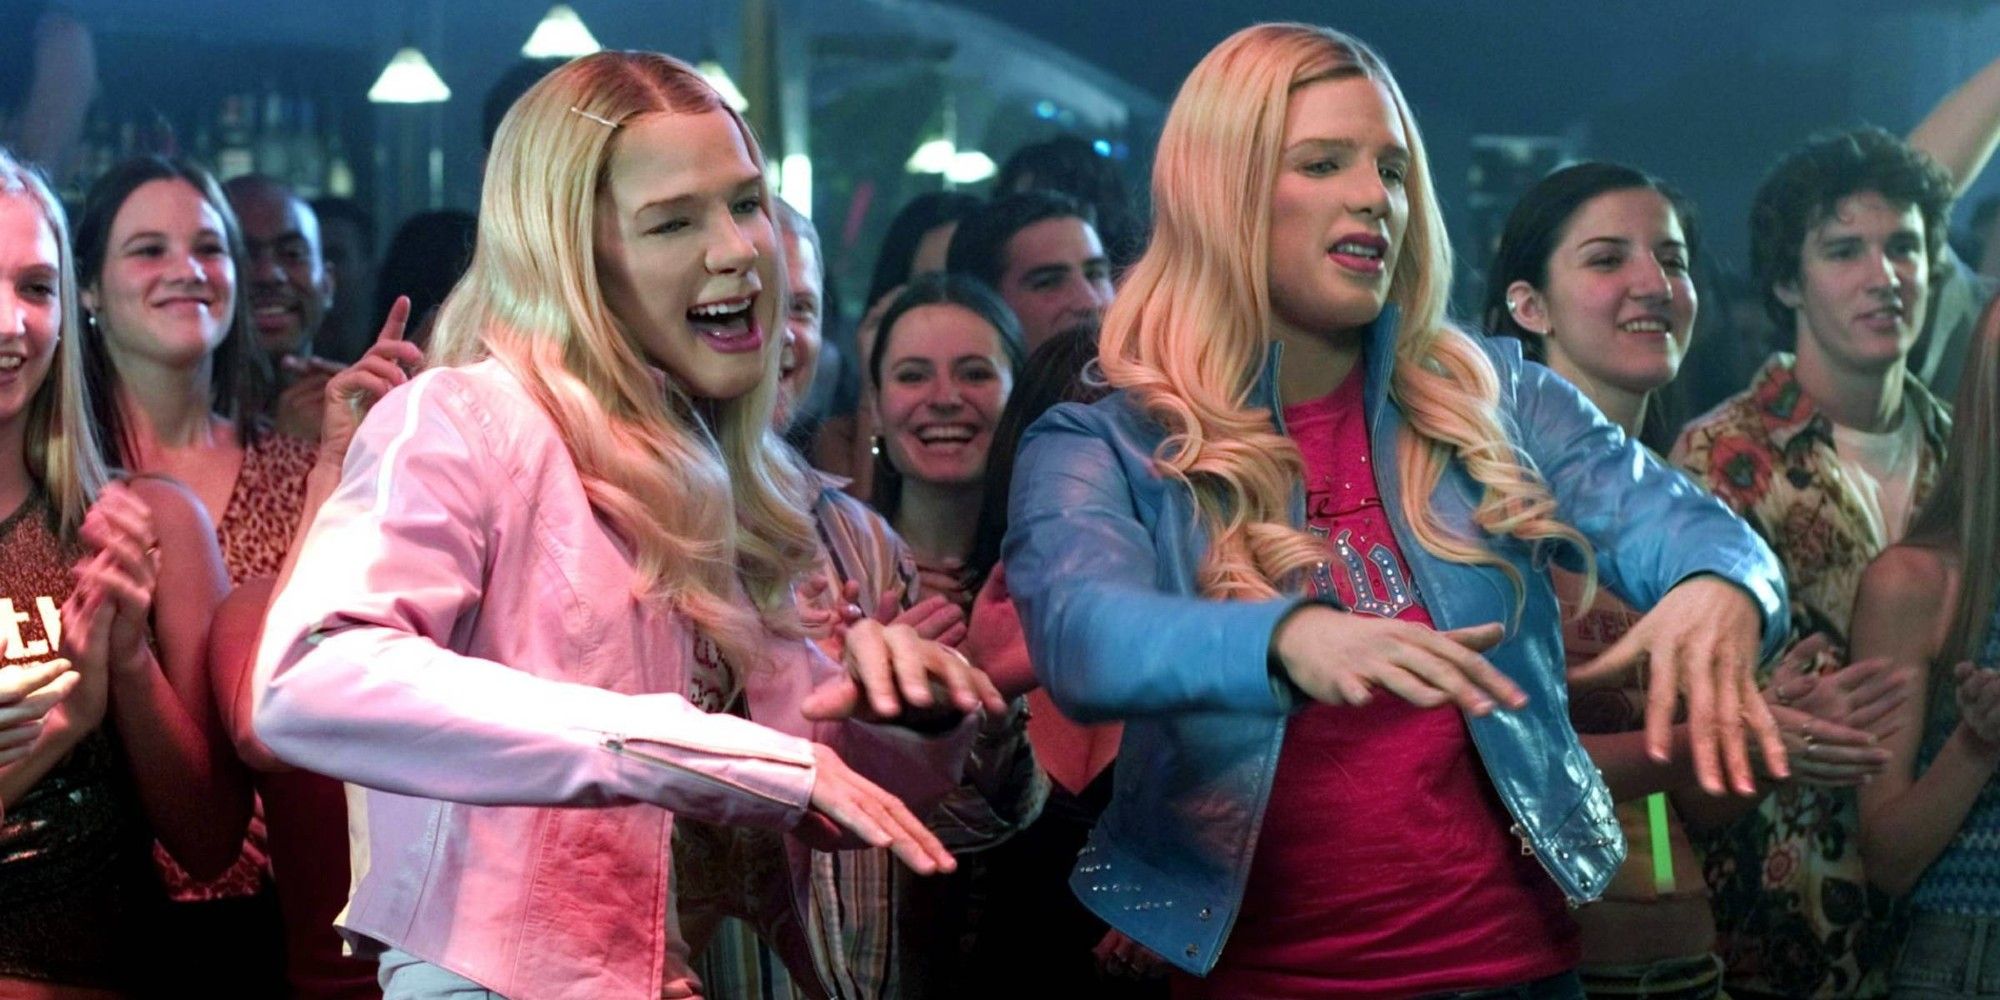 white chicks tiffany and brittany wilson cast